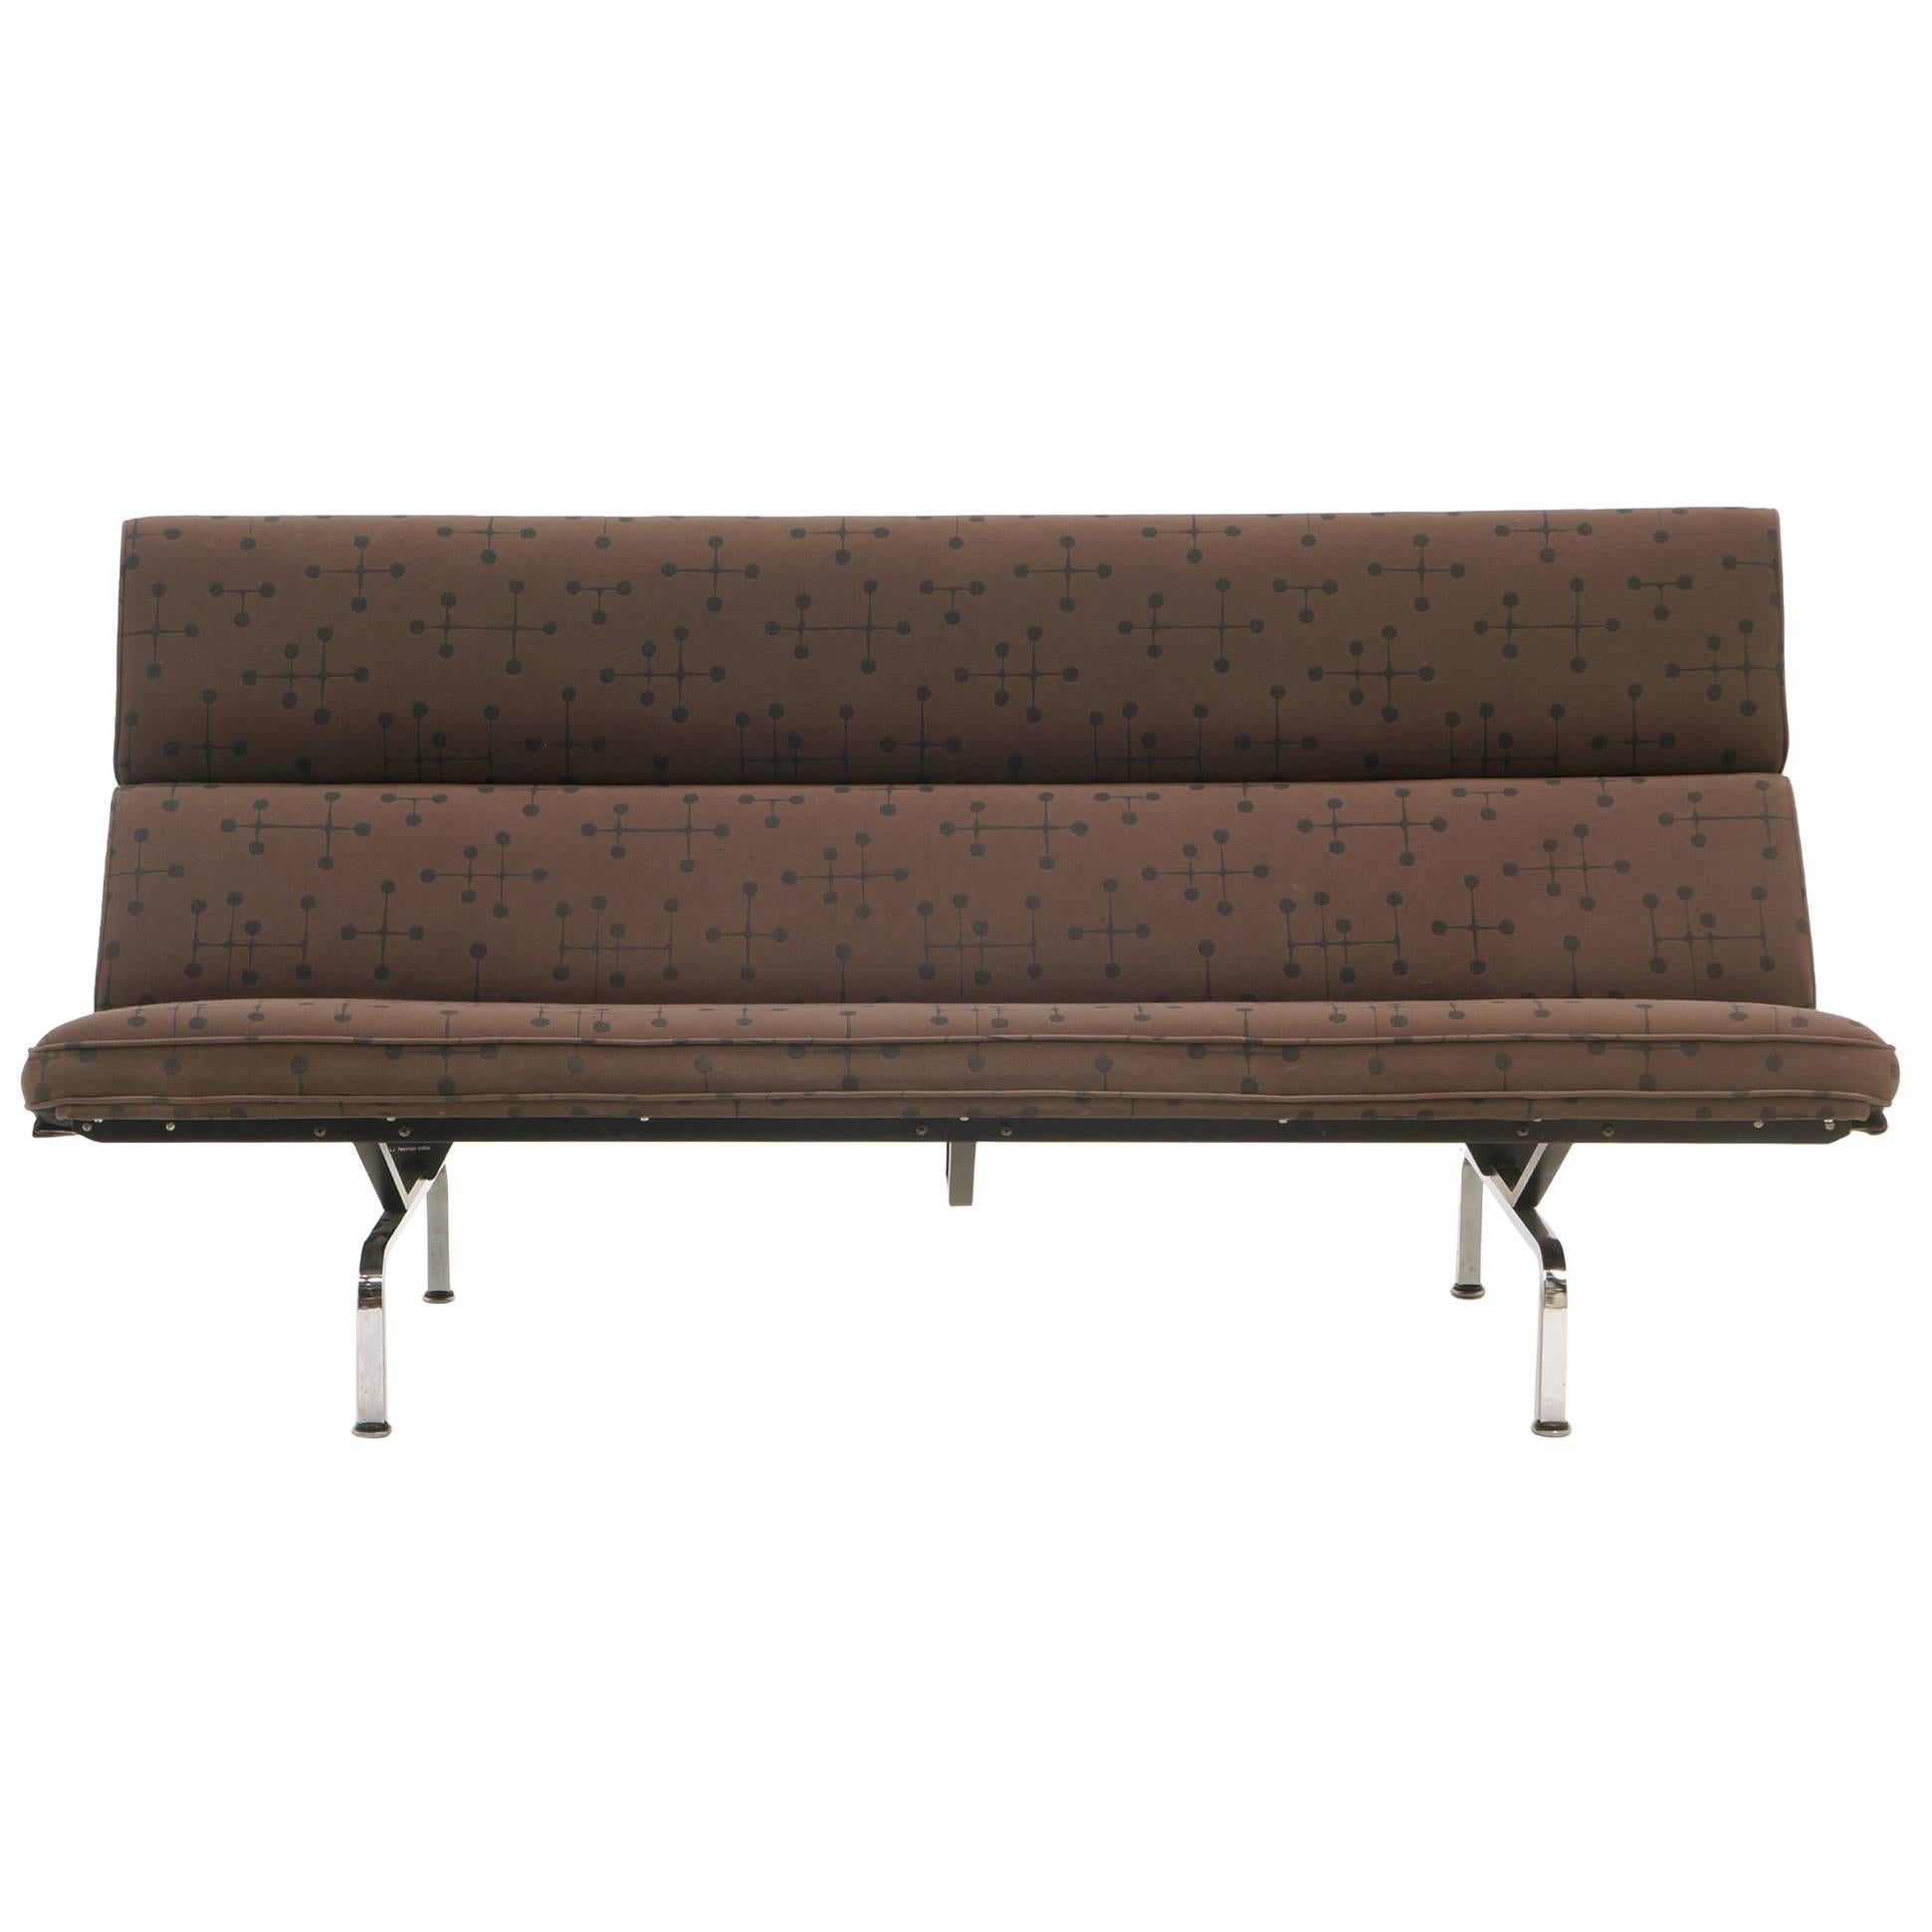 Charles and Ray Eames Sofa Compact for Herman Miller in Eames Dot Pattern Fabric